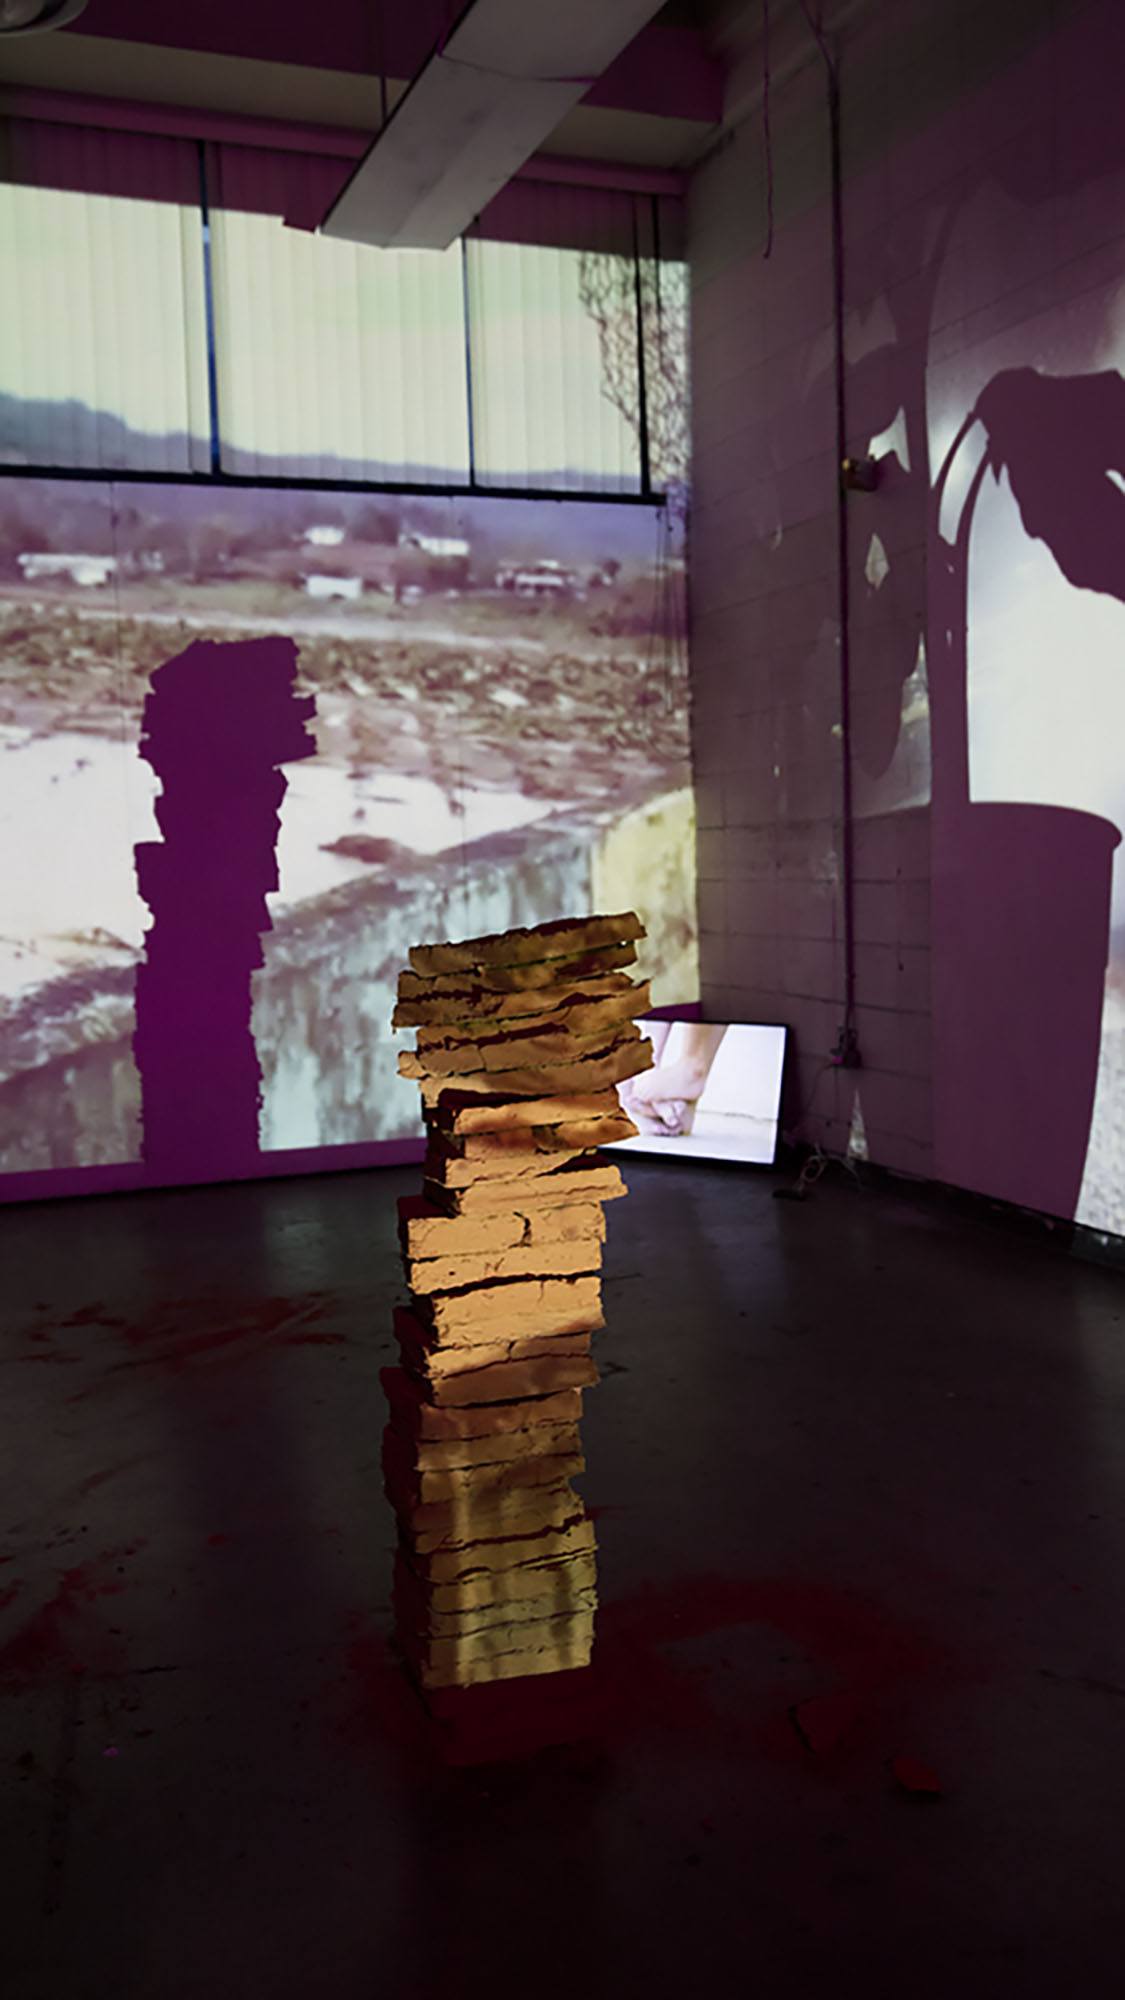 A stack of adobe tiles on a gallery floor with projections on the walls